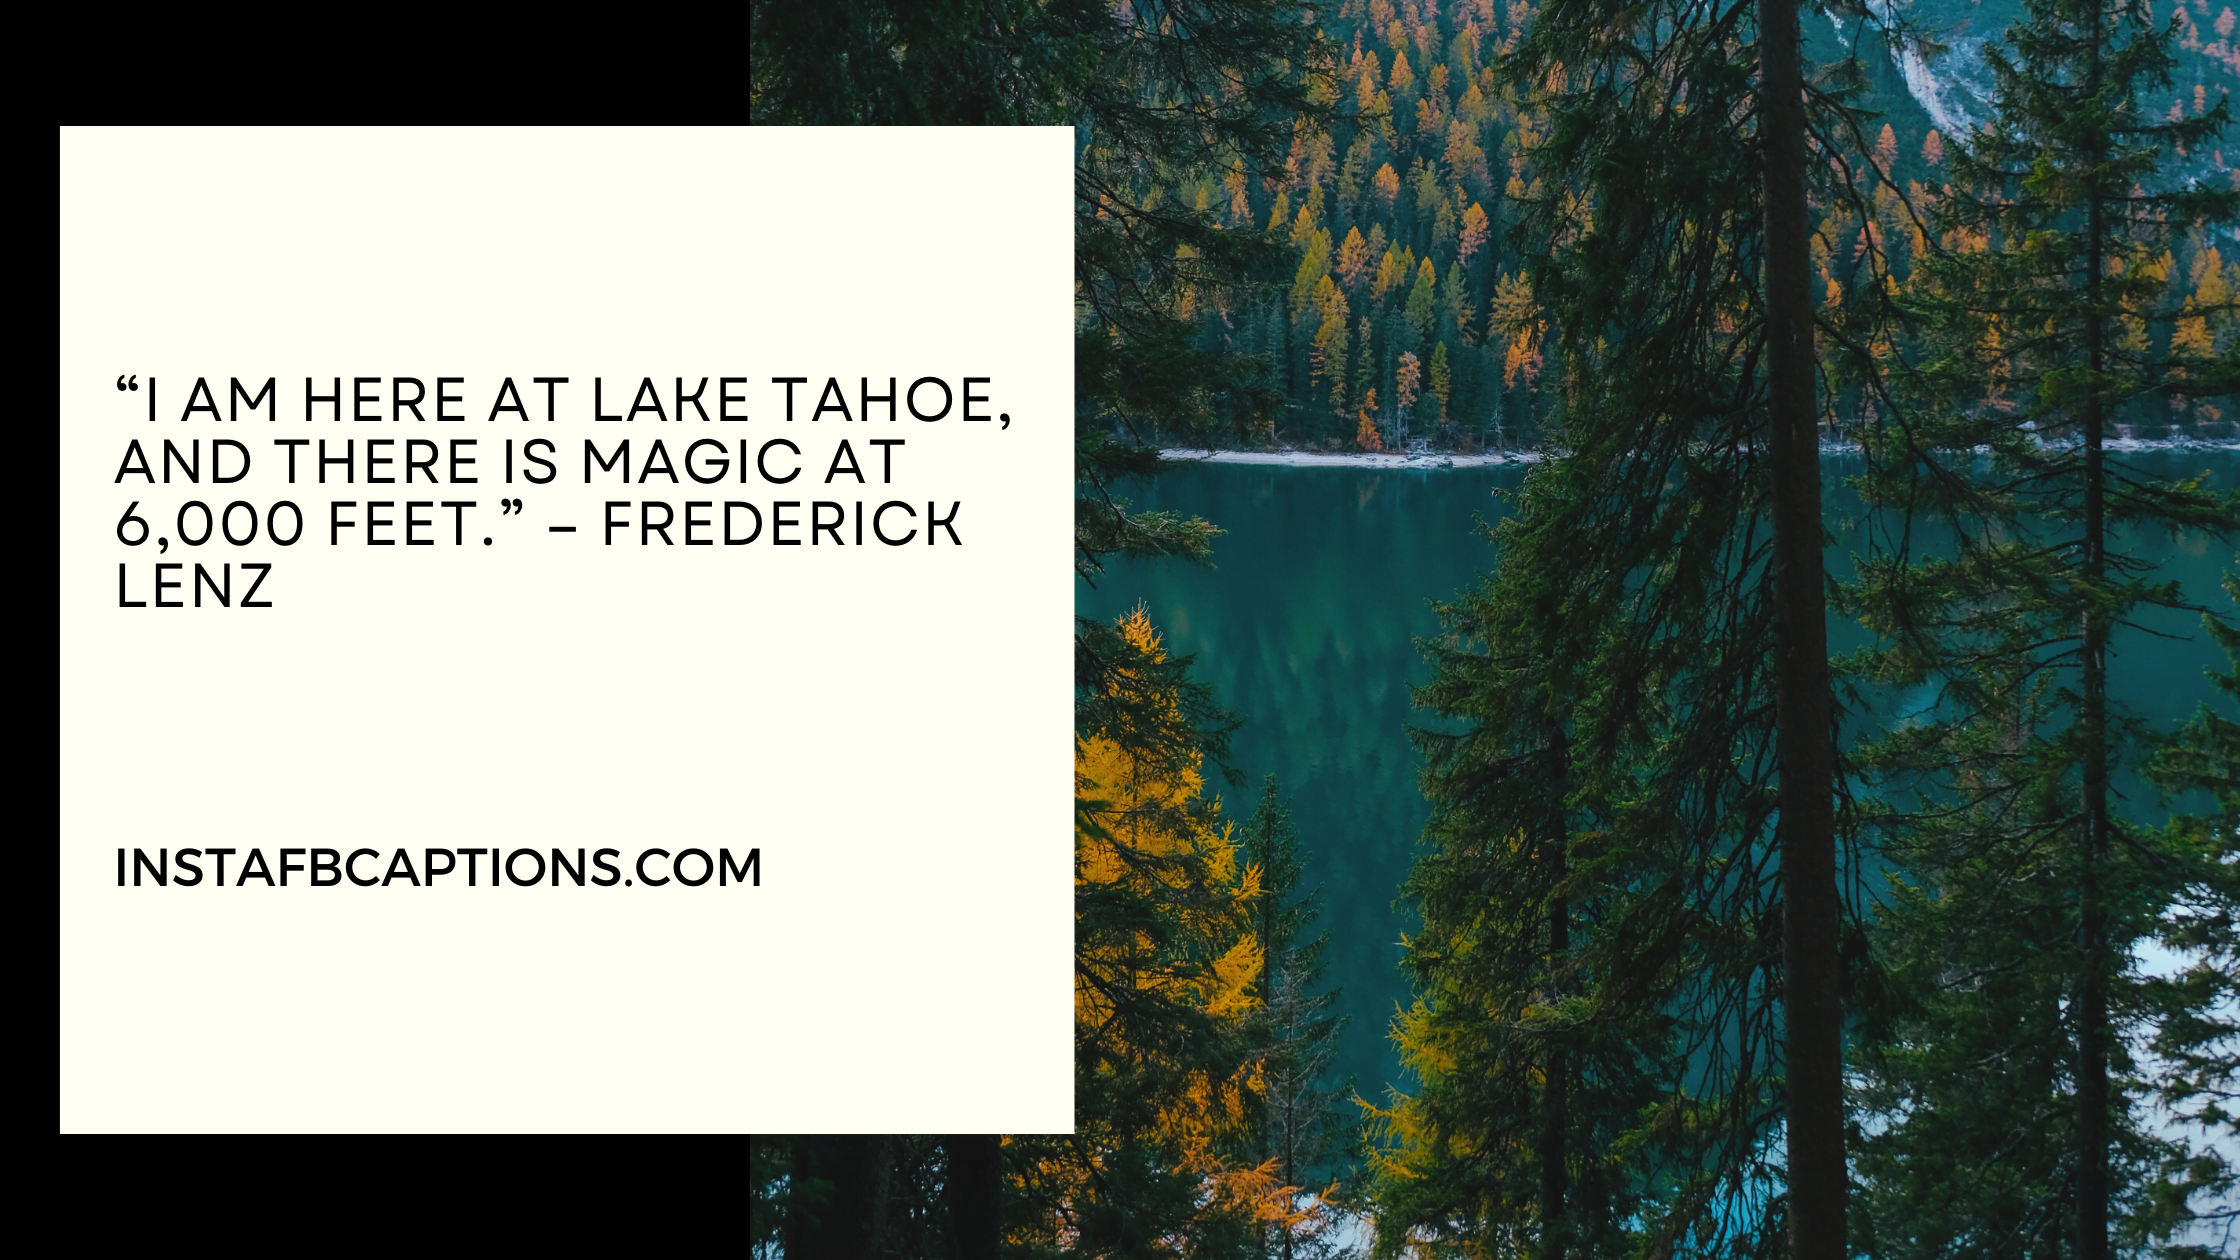 “I am here at Lake Tahoe, and there is magic at 6,000 feet.” – Frederick Lenz  - Lake Tahoe Quotes  - 95+ Dazzling Lake Tahoe Captions in 2023